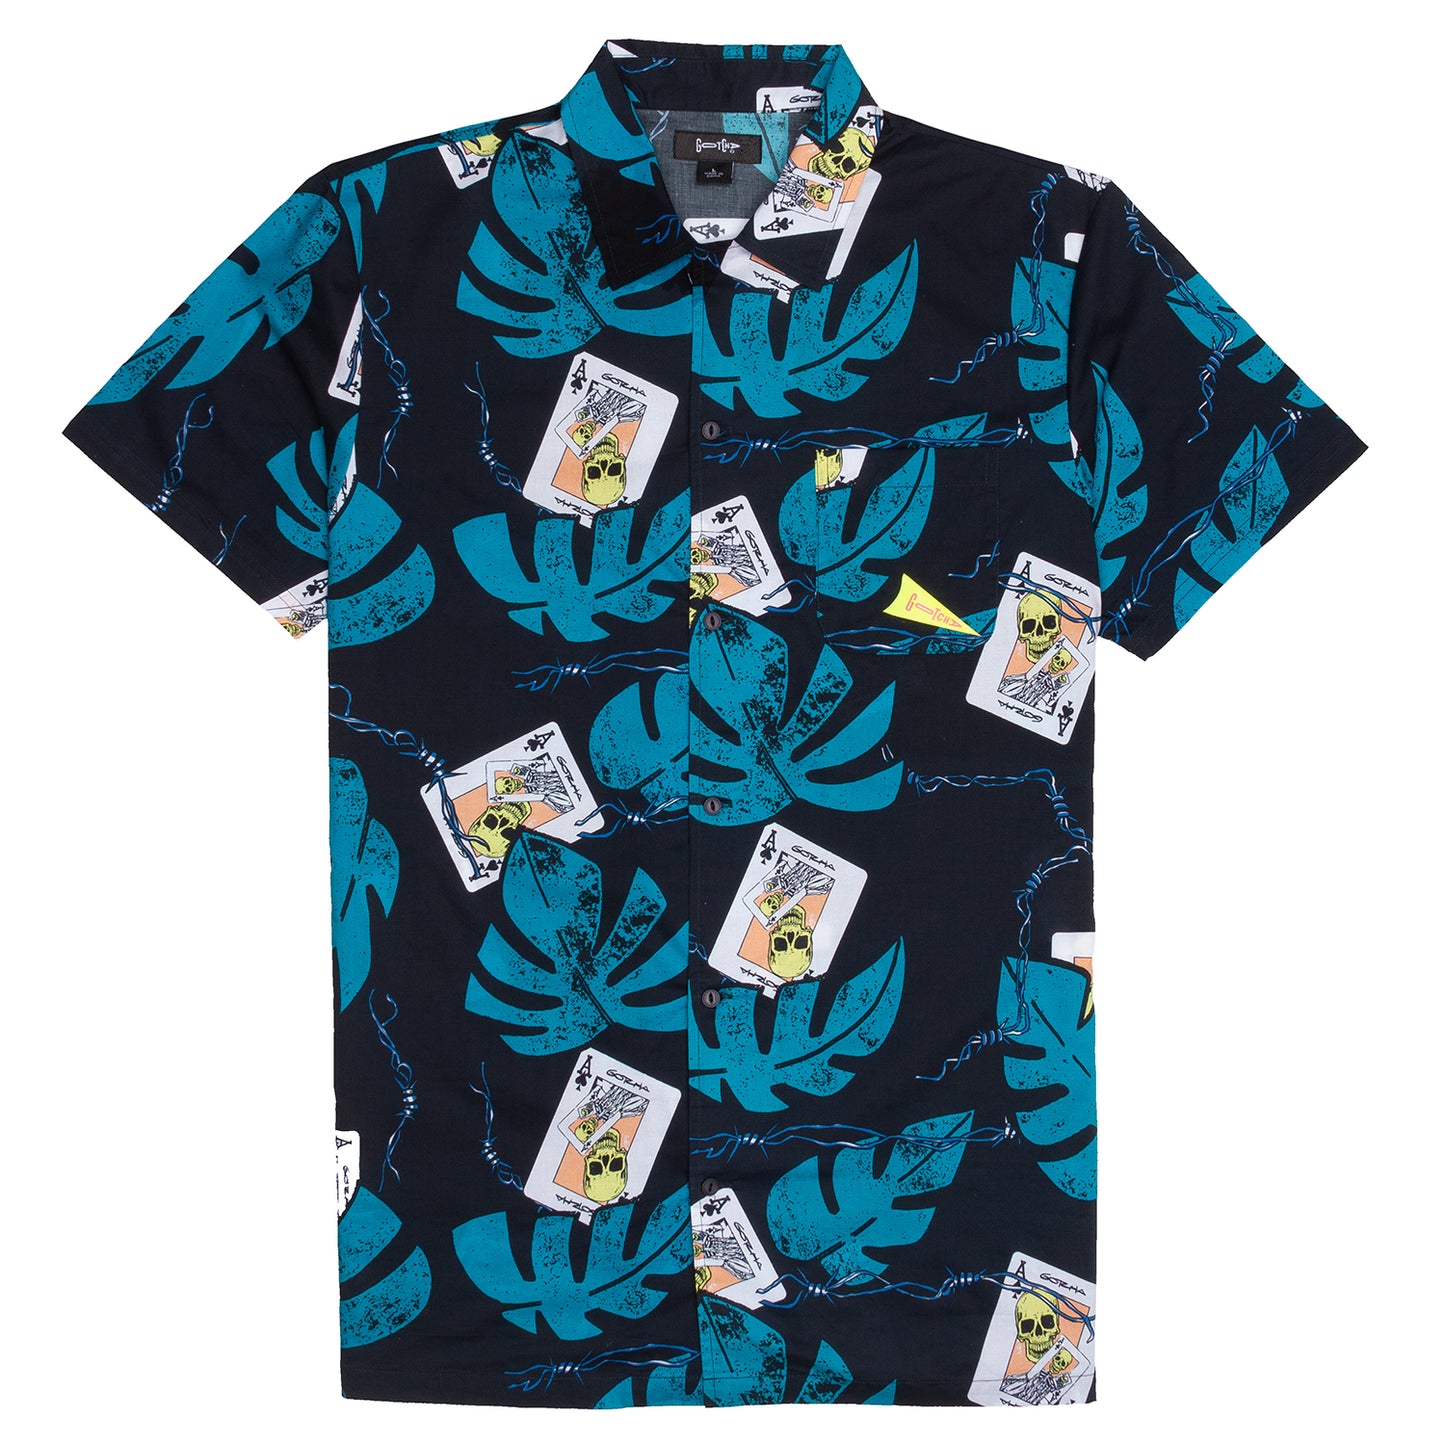 Men’s Cotton Viscose Shirt with Turquoise Leaf and Card Design - Deal